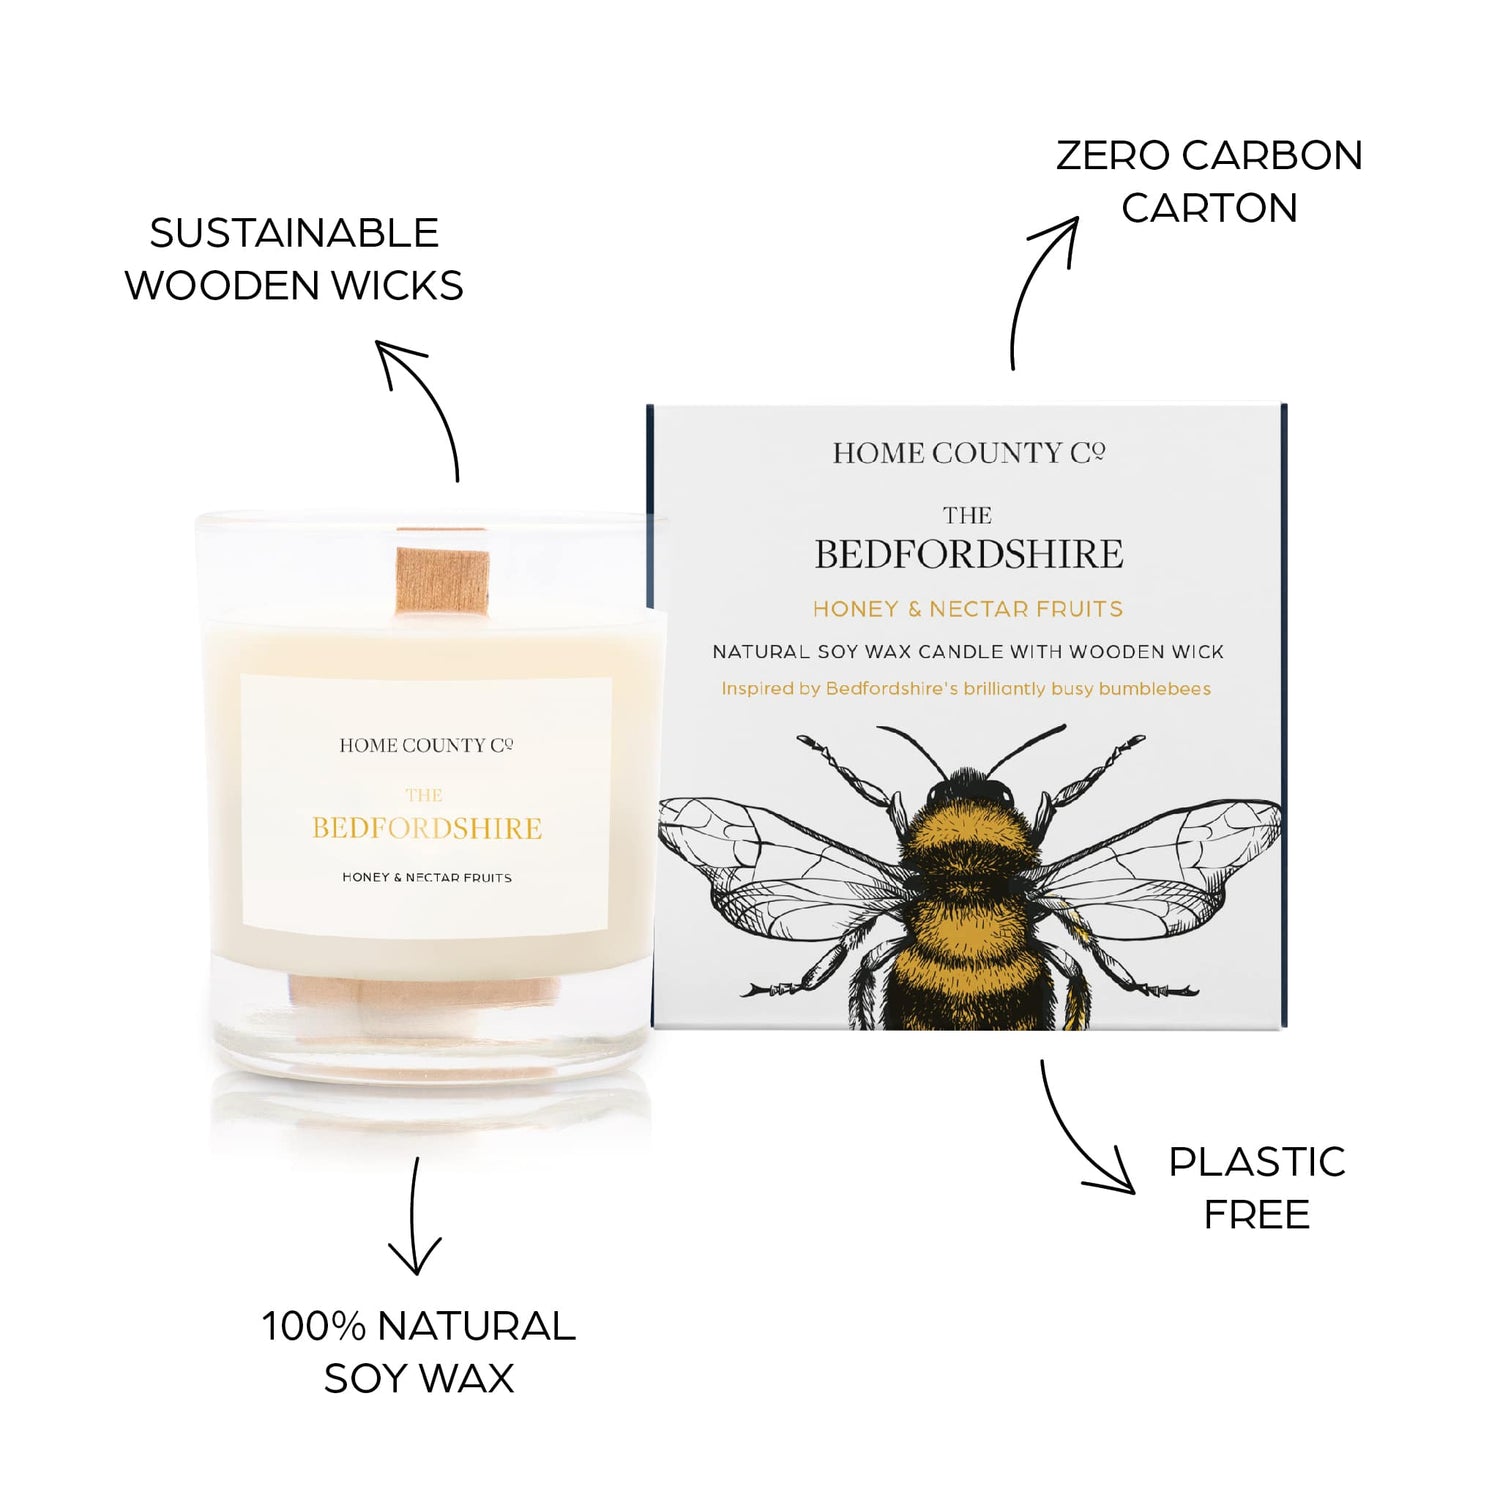 Sustainable candle credentials are shown around the honey scented candle image - sustainable wooden wicks, zero carbon carton, 100% natural soy wax, plastic free